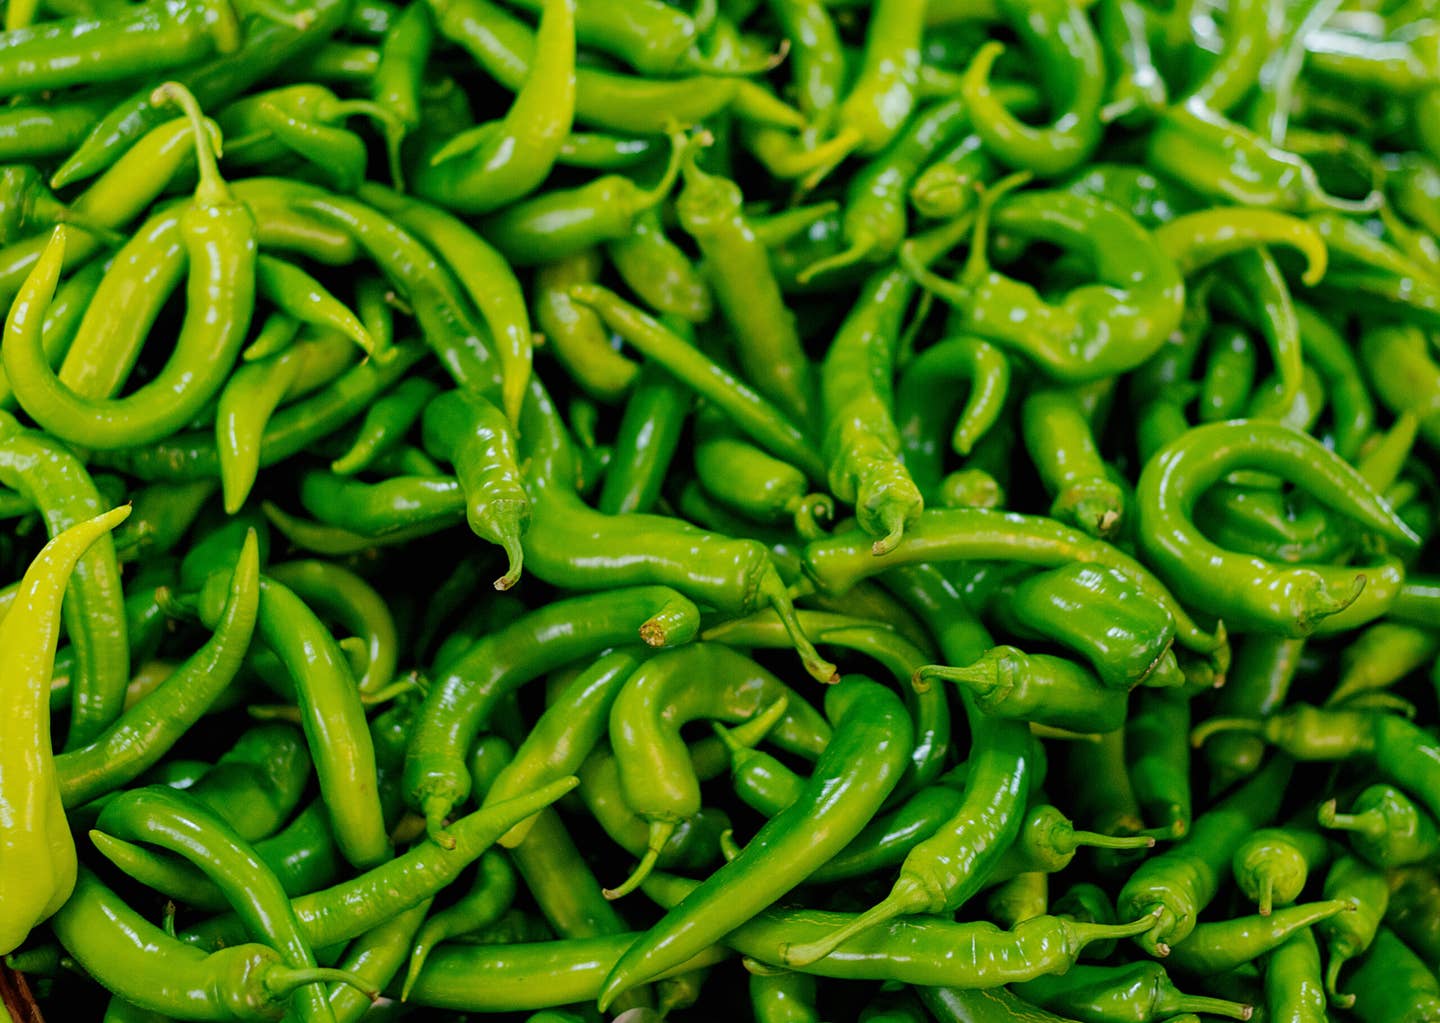 Harvest of green chili peppers.